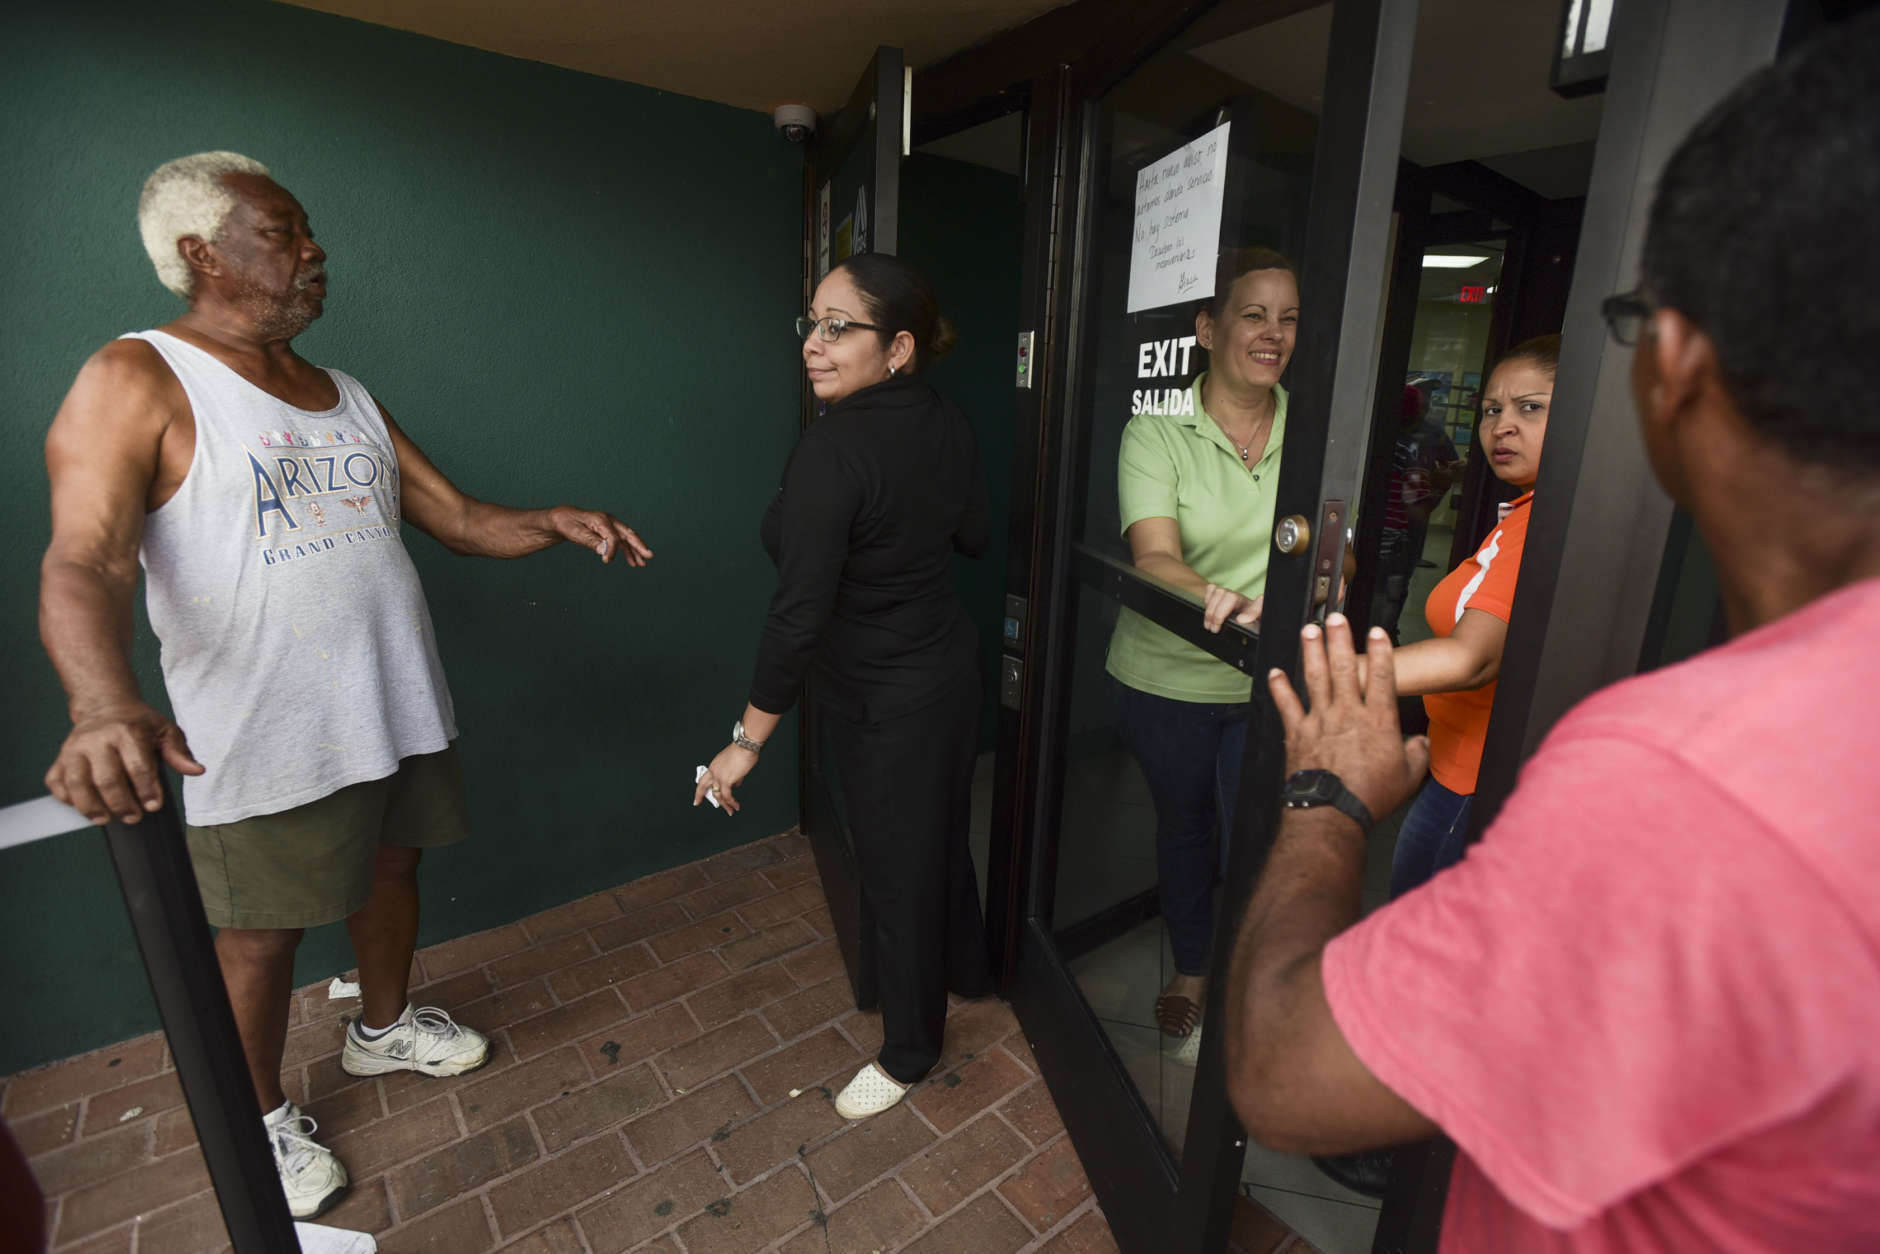 Clients of Coopaca Coperative wait in line to withdraw cash from their accounts after the passage of Hurricane Maria a week ago, in Catano, Puerto Rico, Wednesday, Sept. 27, 2017. The cooperative only granted 200 turns to remove a maximum of one hundred dollars per customer. (AP Photo/Carlos Giusti)